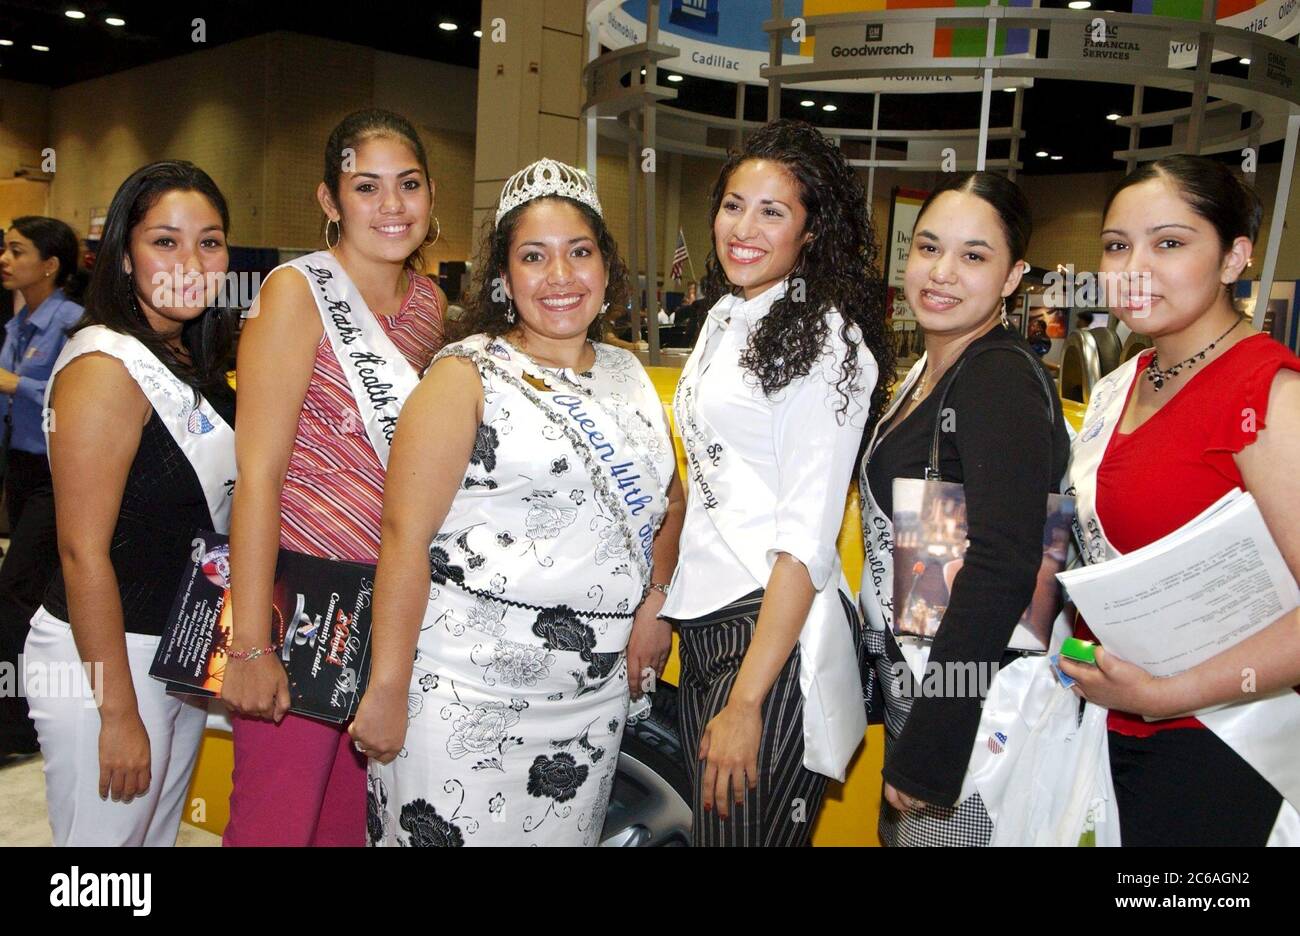 San Antonio, Texas USA, July 2004: Teen beauty queens from Corpus Christi, Texas pose on the trade show floor at at the League of United Latin American Citizens (LULAC) National Convention. ©Bob Daemmrich Stock Photo